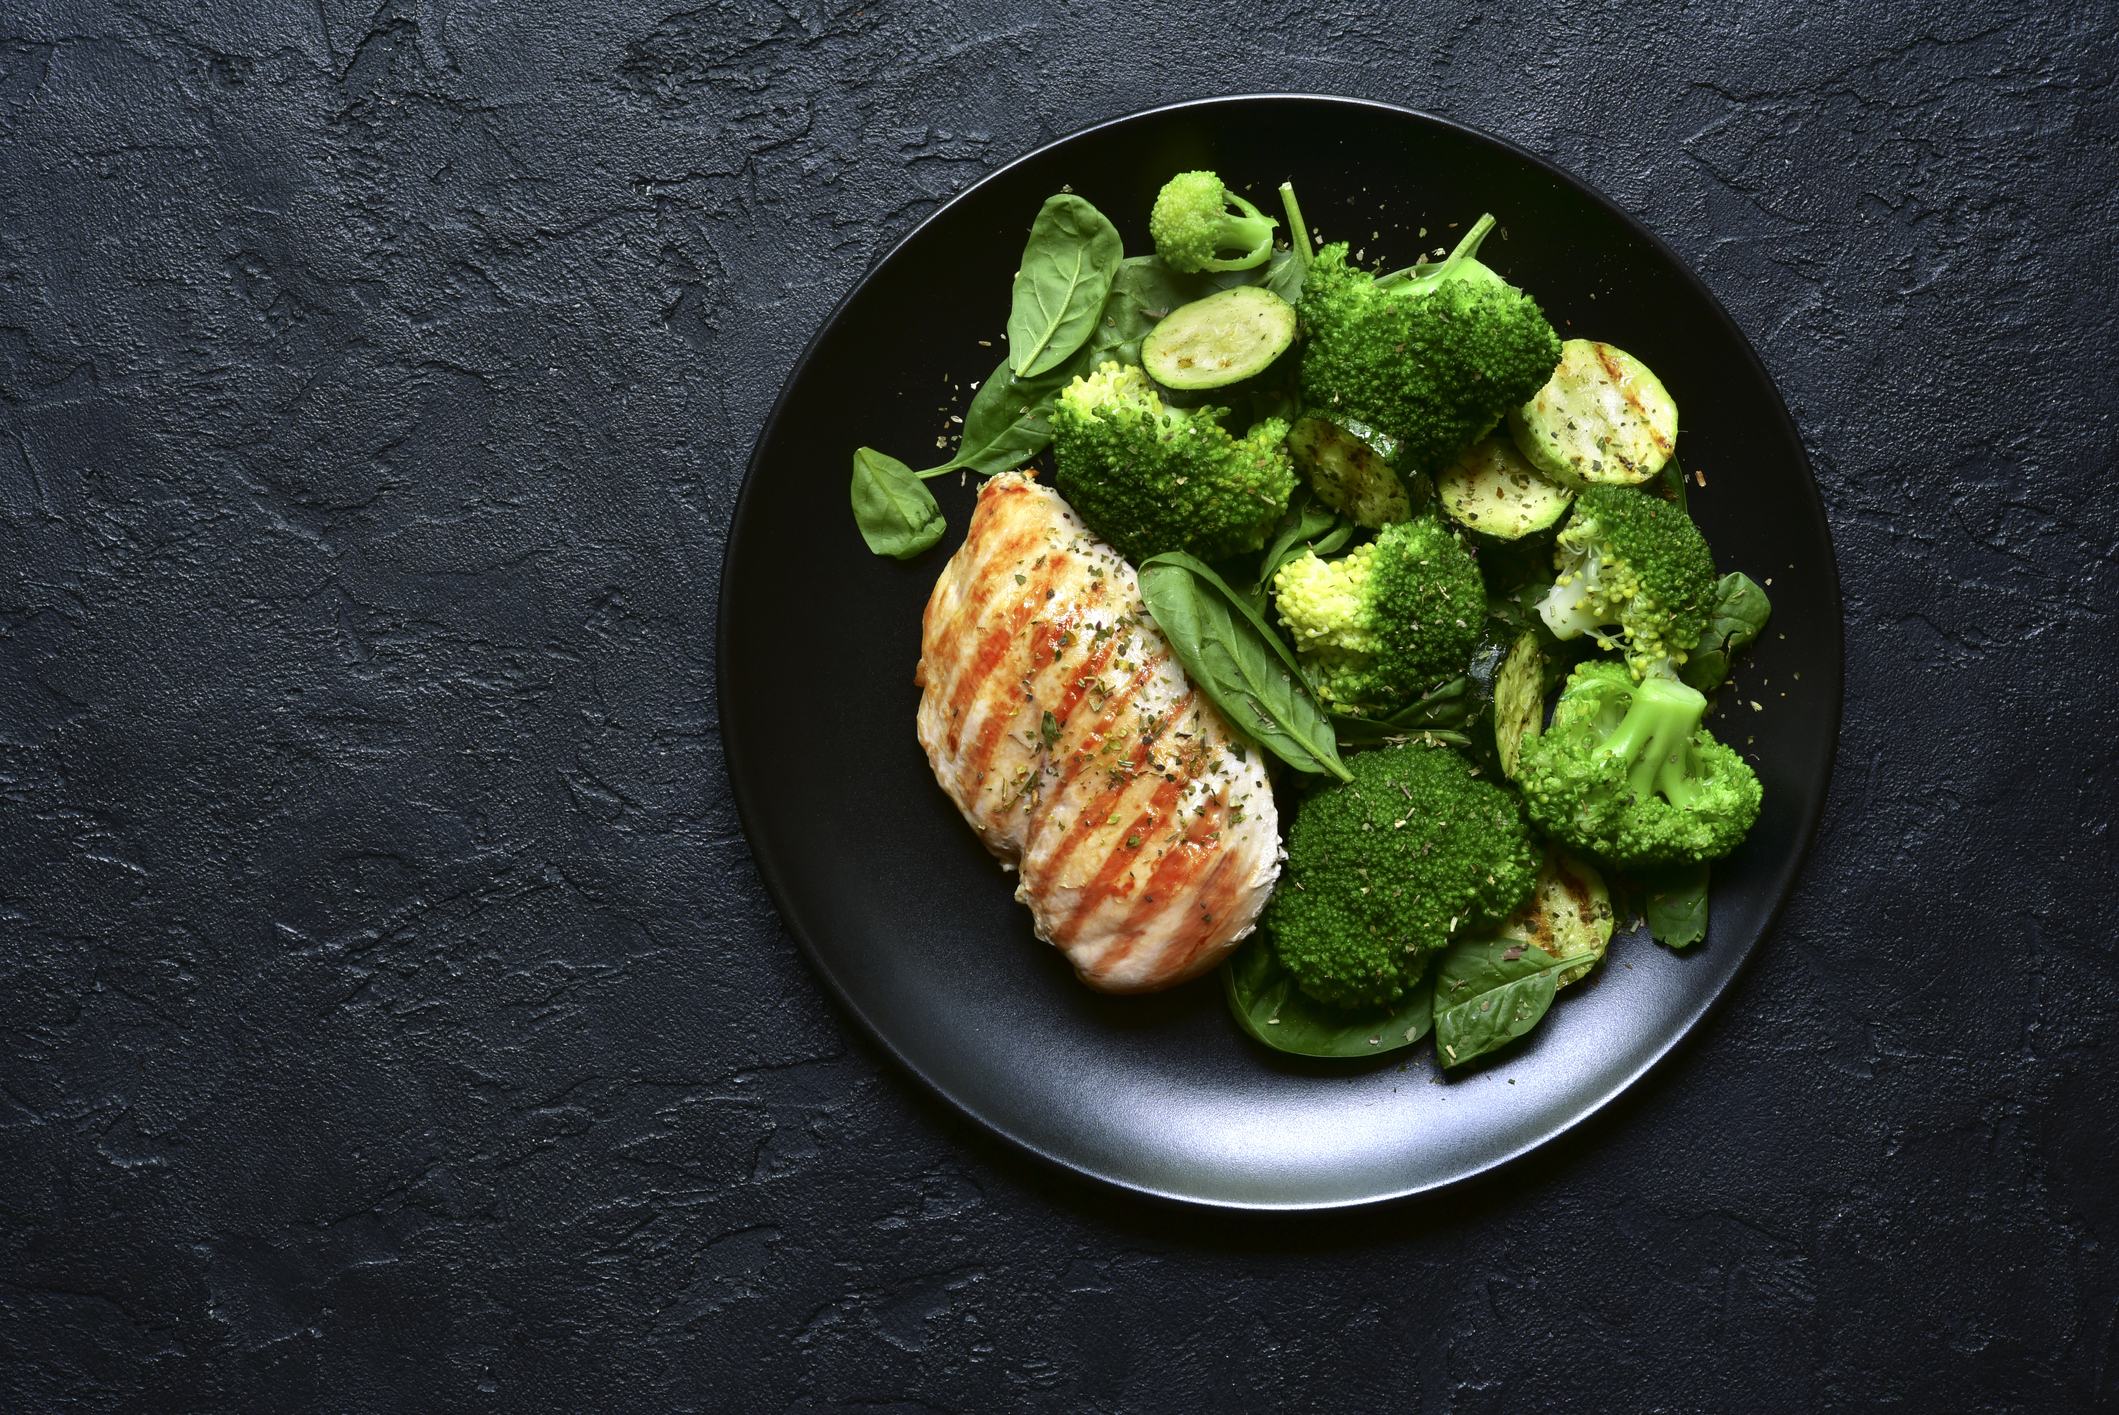 Grilled chicken fillet with green vegetable salad on a black slate, stone or concrete background.Top view with copy space.